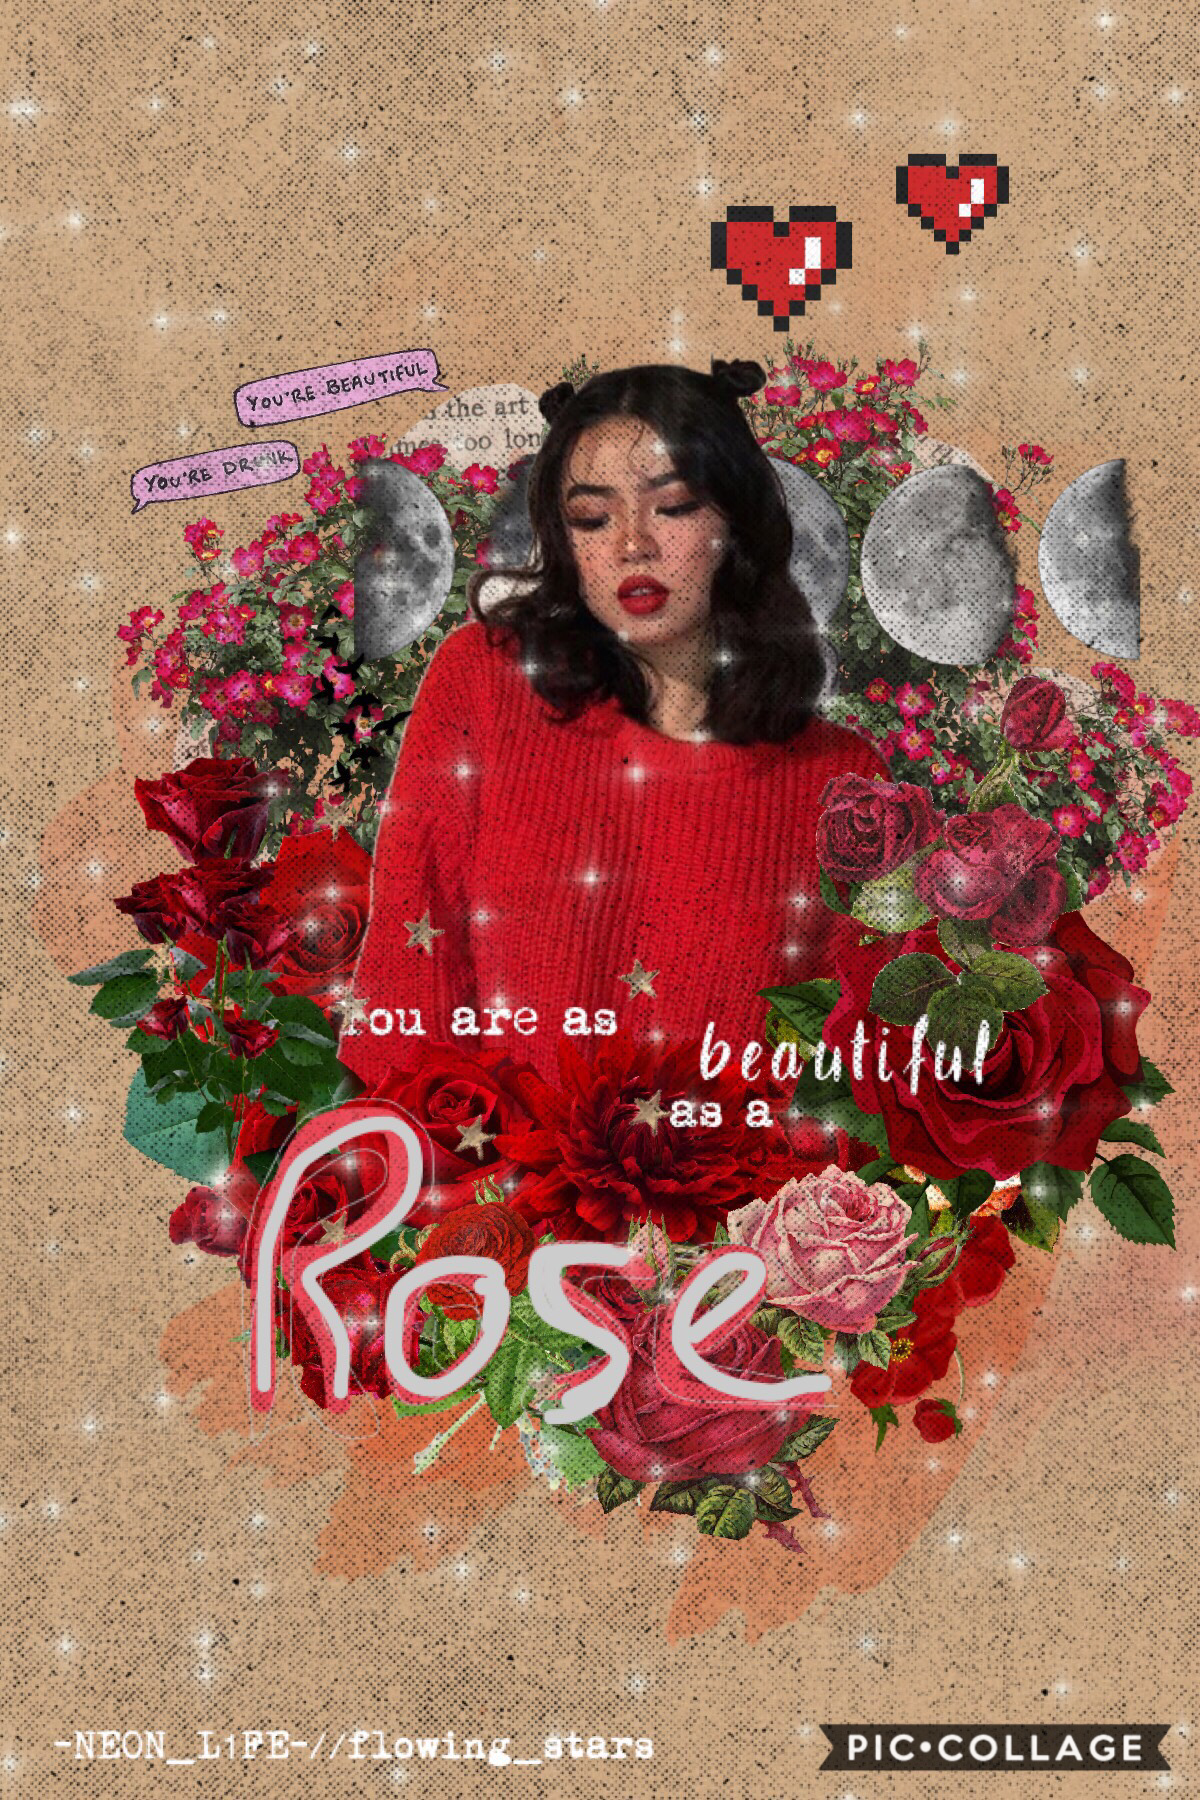 Collab with the incredible...
@Flowing_stars!!! U must go follow her right now! Her acc is absolutely gorgeous! I put it all together and she gave me the bkground and quote. QOTD: if I made an extras acc what should I post there? 🧐